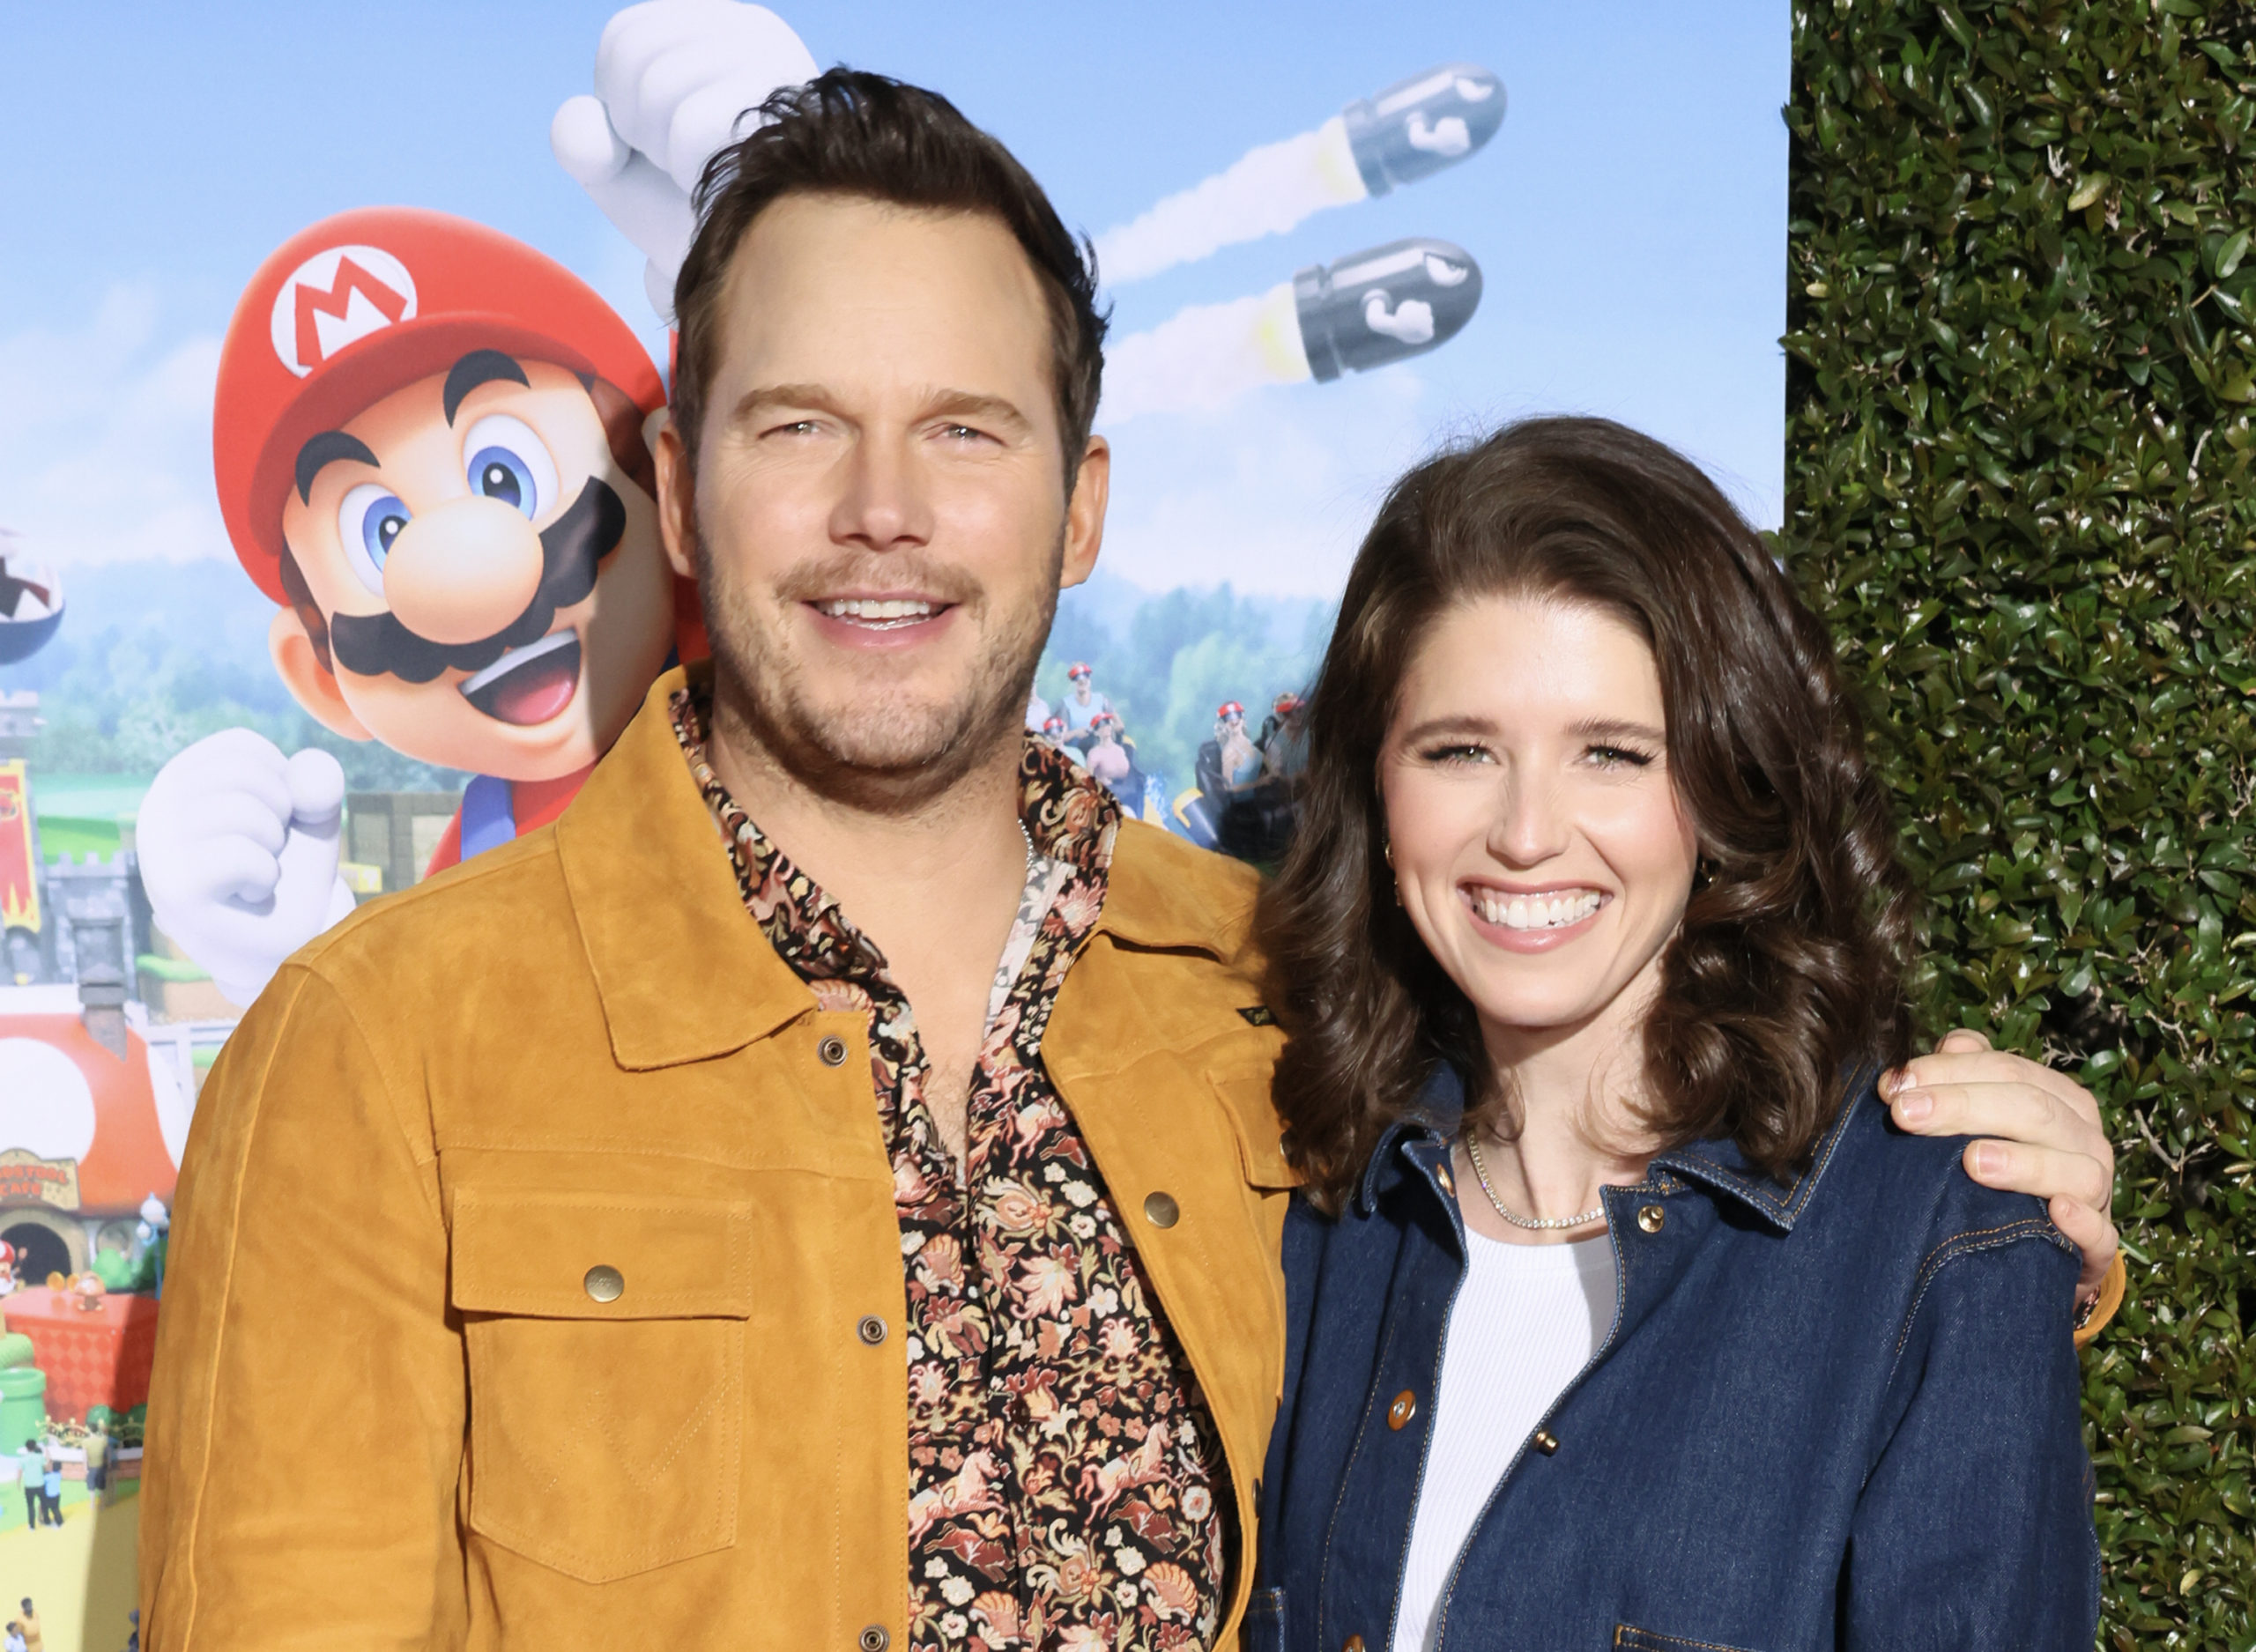 UNIVERSAL CITY, CALIFORNIA - FEBRUARY 15: (L-R) Chris Pratt and Katherine Schwarzenegger attend the "SUPER NINTENDO WORLD" welcome celebration at Universal Studios Hollywood on February 15, 2023 in Universal City, California. (Photo by Rodin Eckenroth/Getty Images)